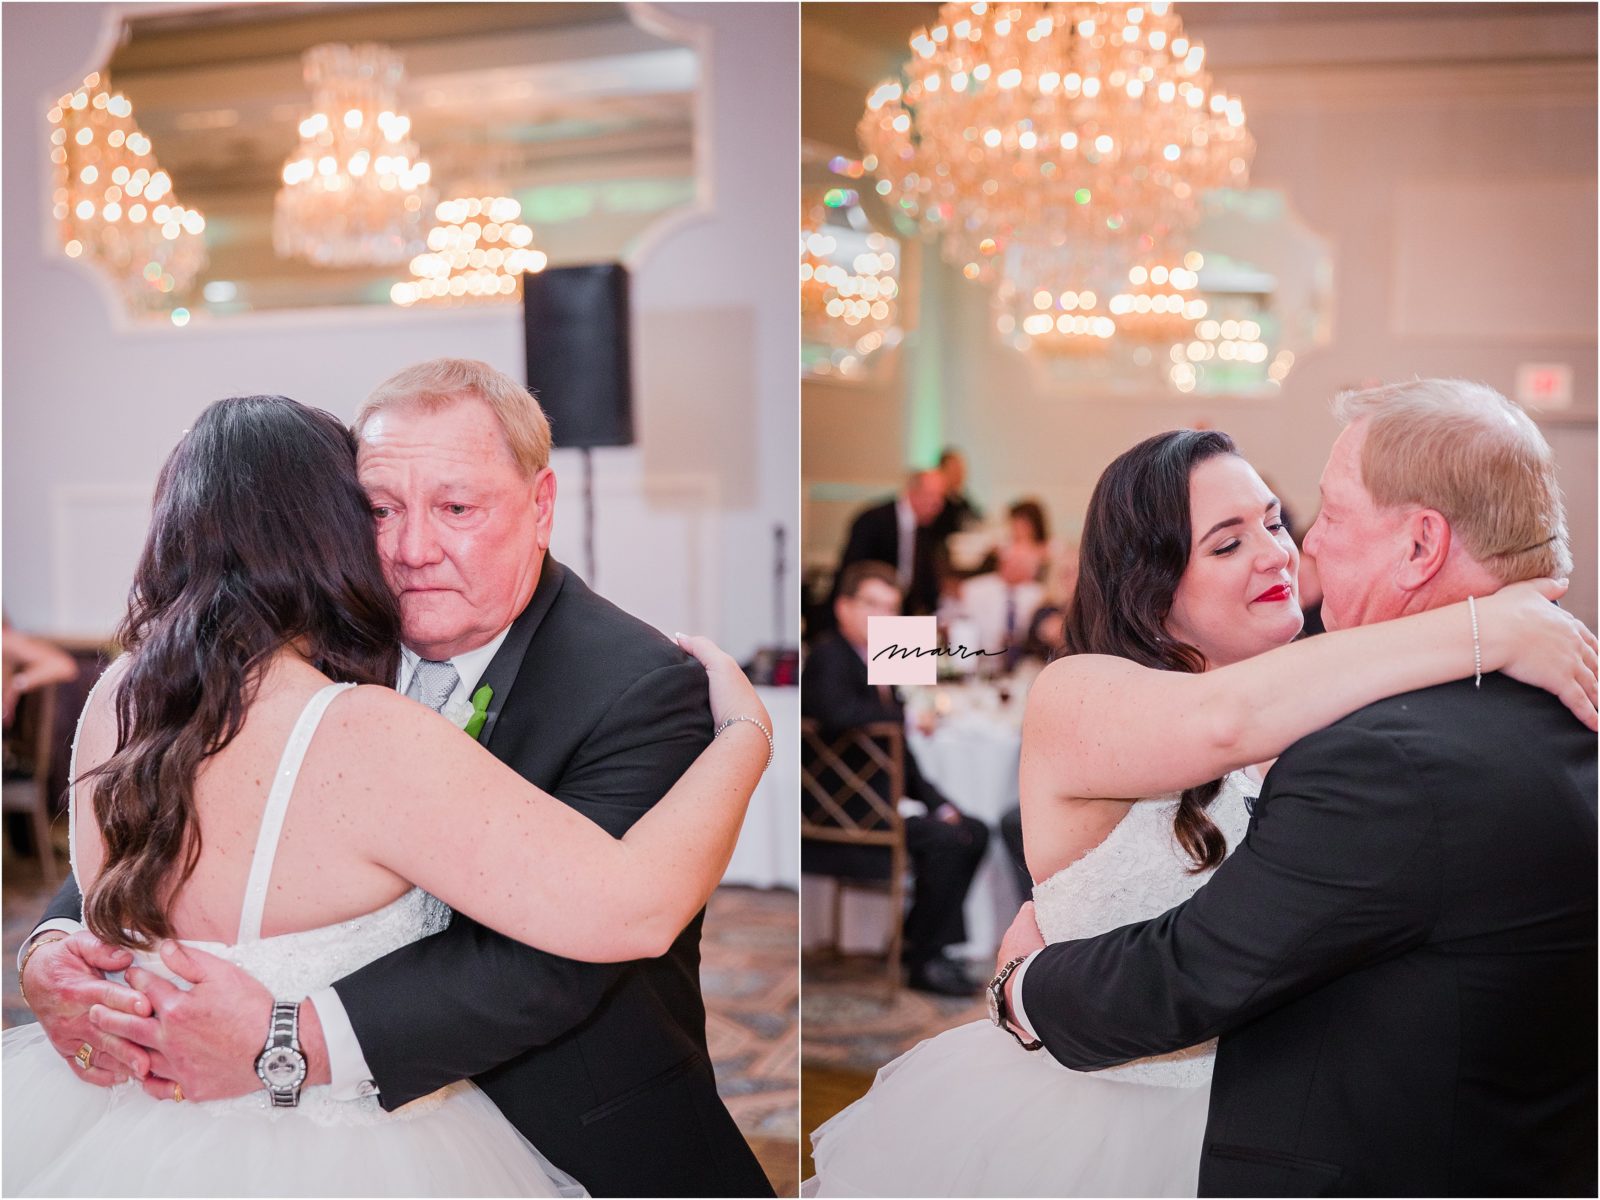 Oakbrook wedding in Drury Lane ,Venue, Reception Hall, Father and daughter dance